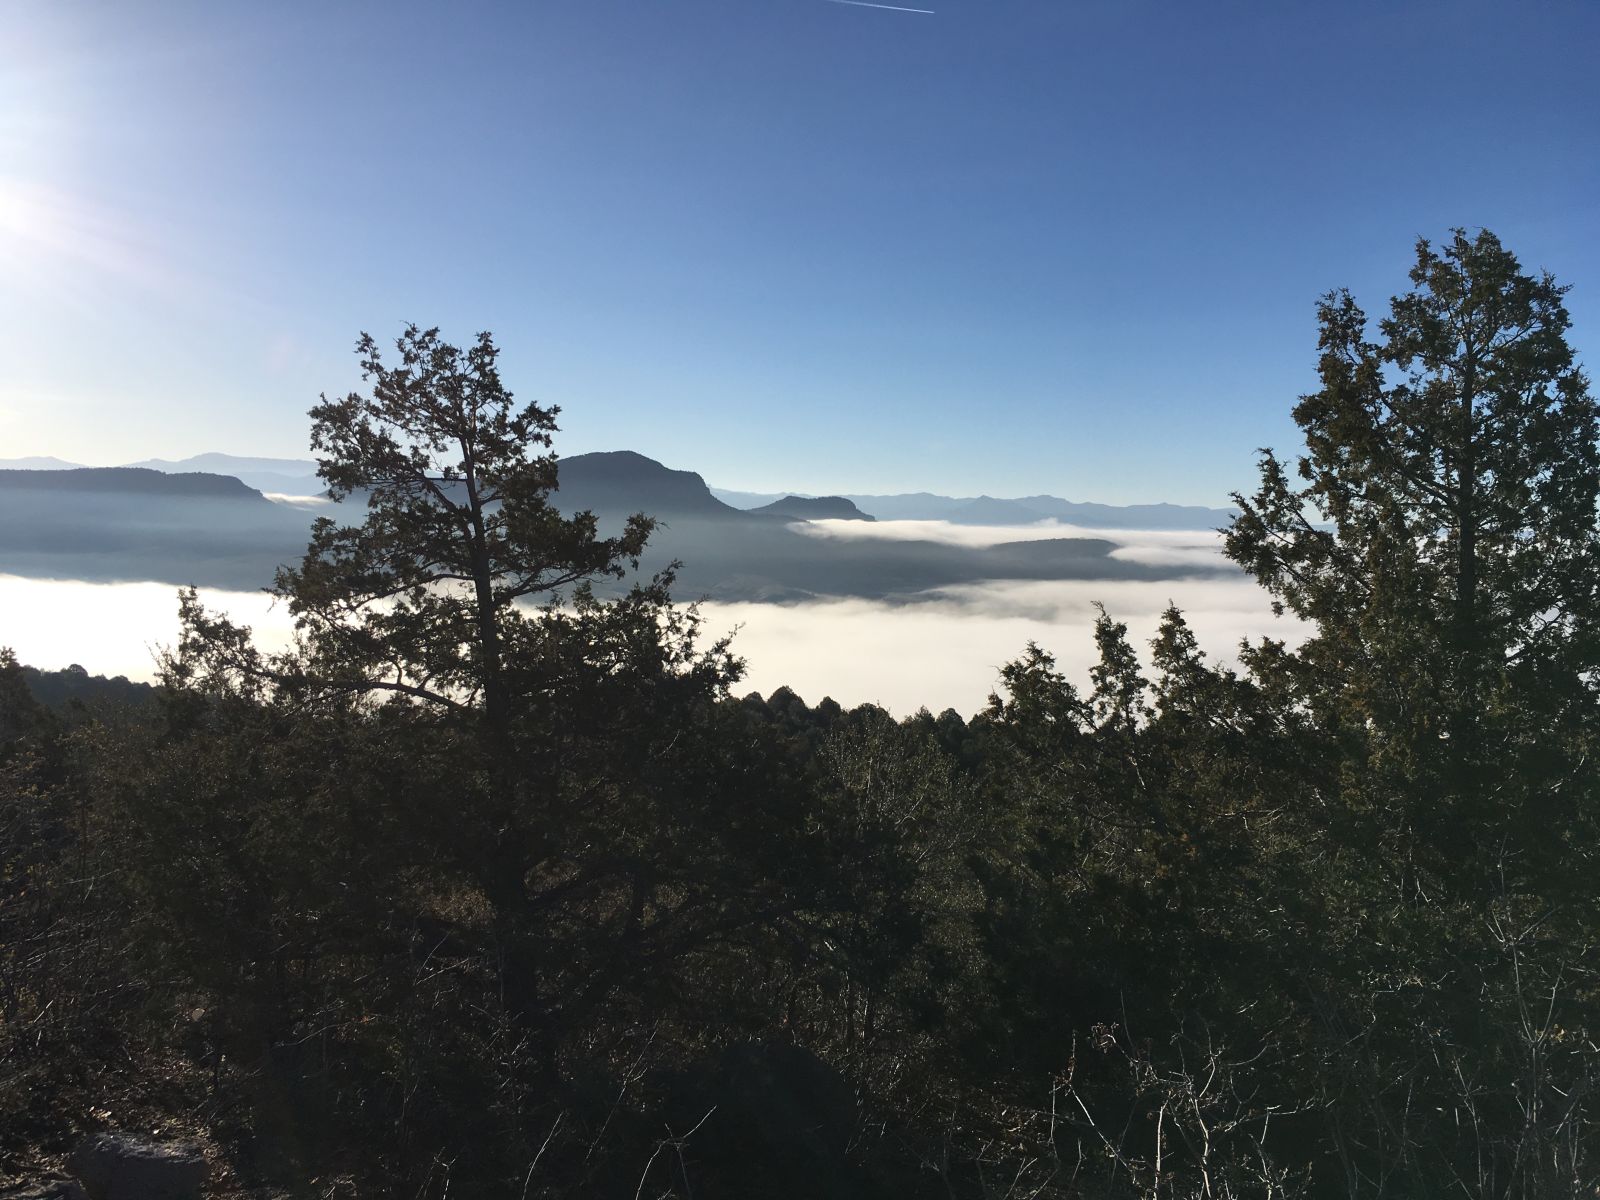 Viewpoint from the pass on Utah Hwy 20, looking east into the Panguitch Valley - is that fog?